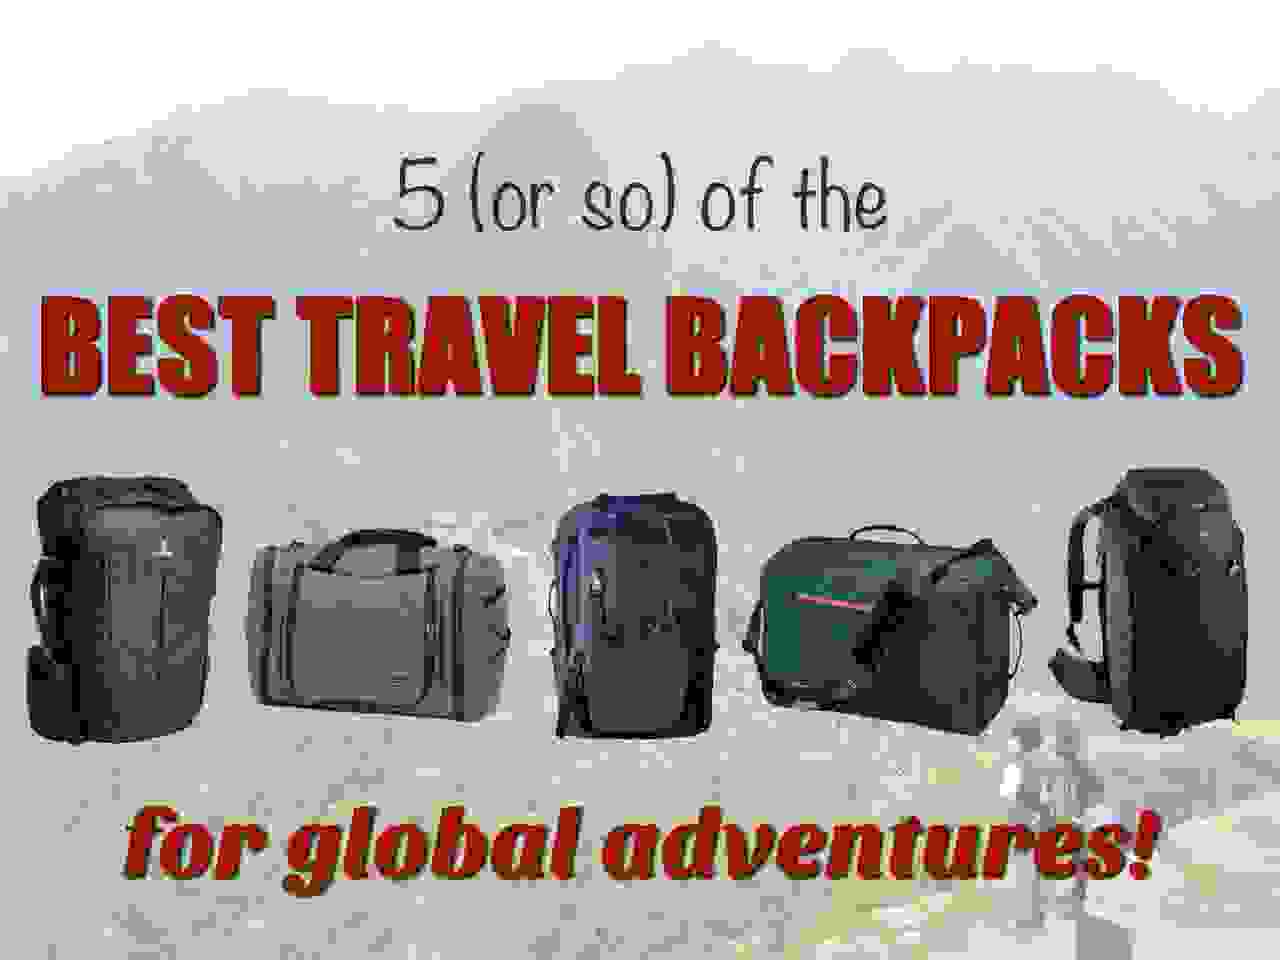 5 of the best travel backpacks for global adventures